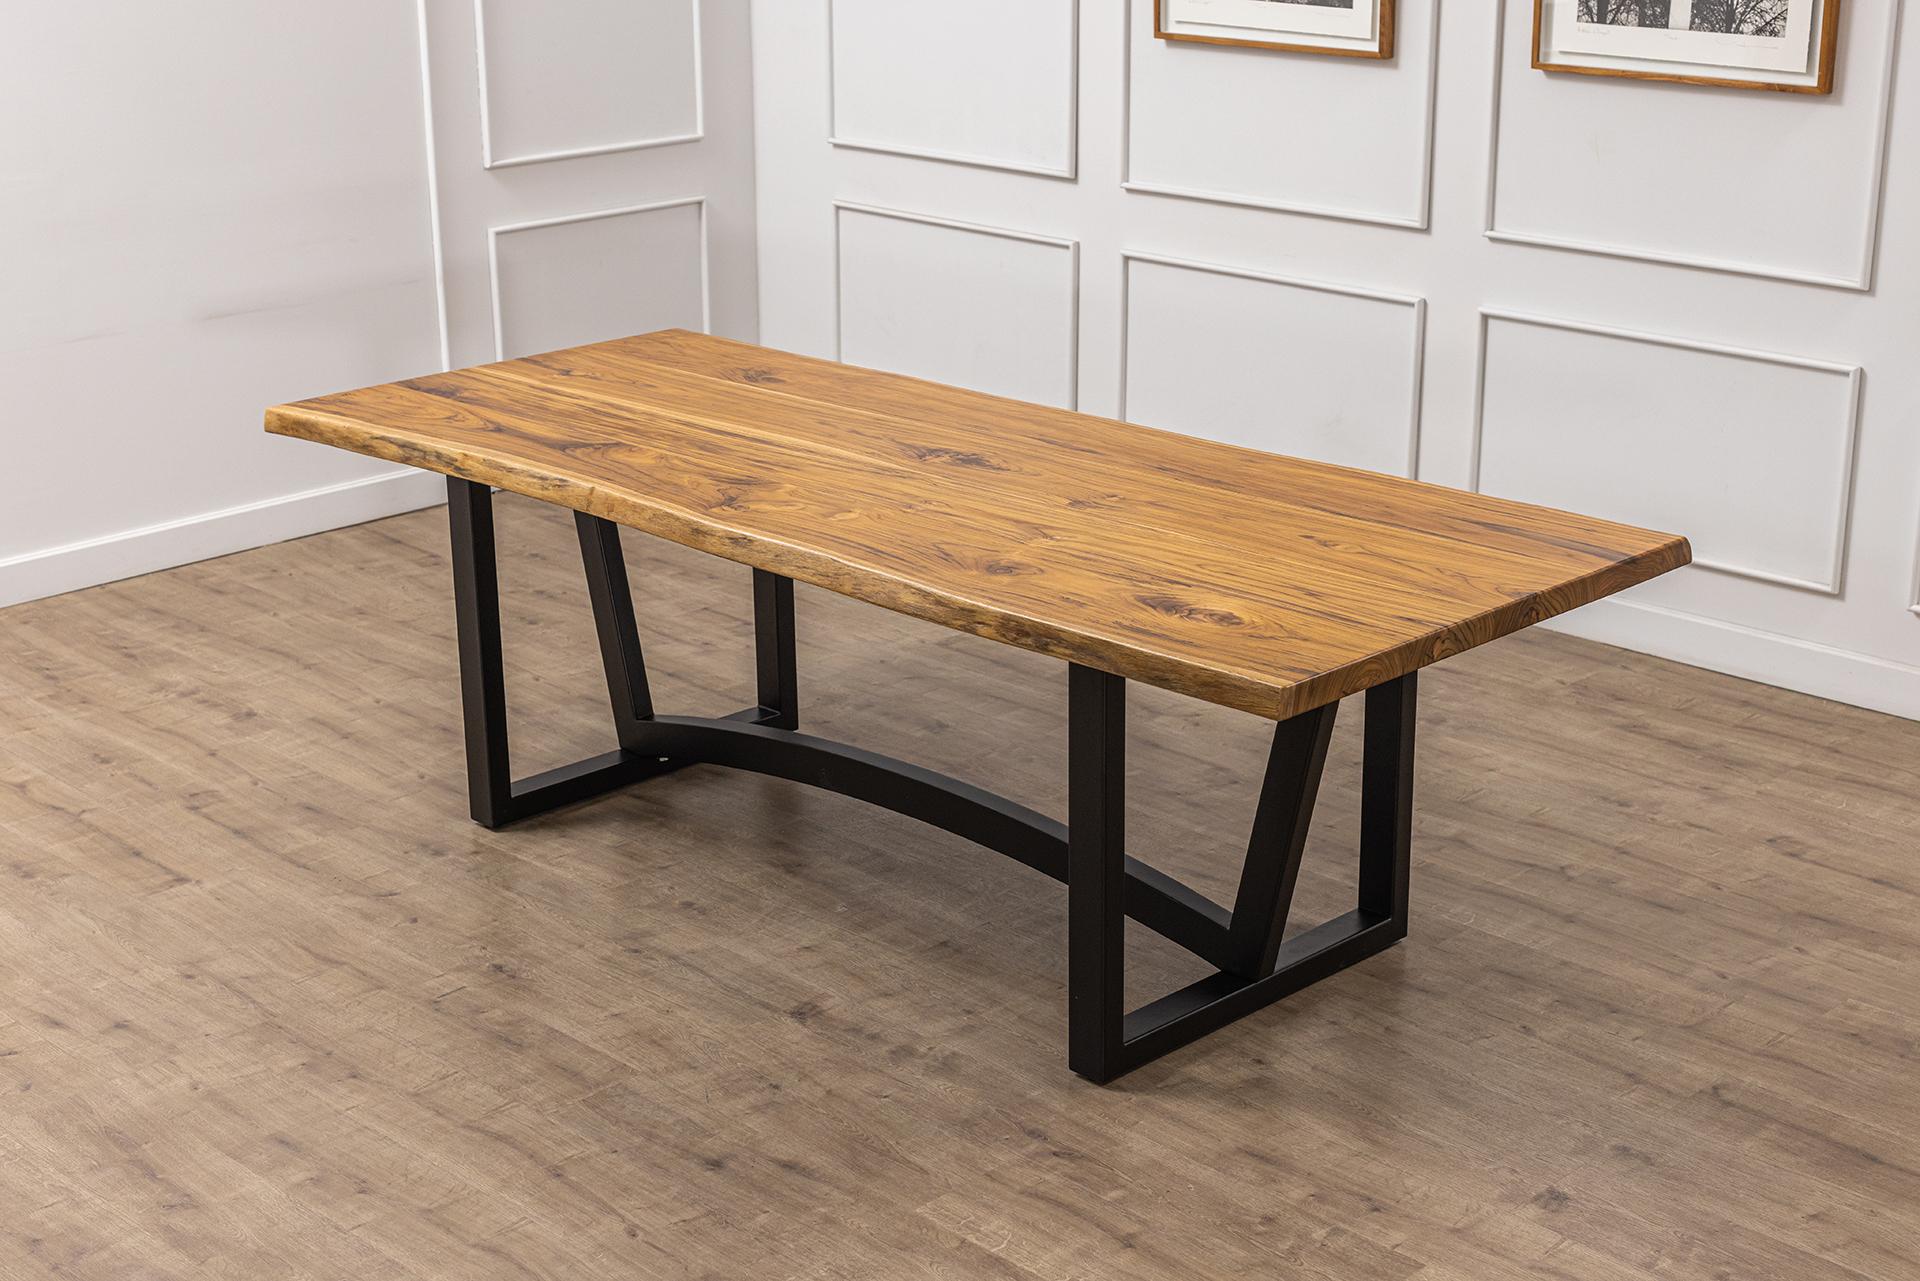 Solid Teak Double Book-Matched Rectangular Dining Table in Smooth Natural In New Condition For Sale In Boulder, CO